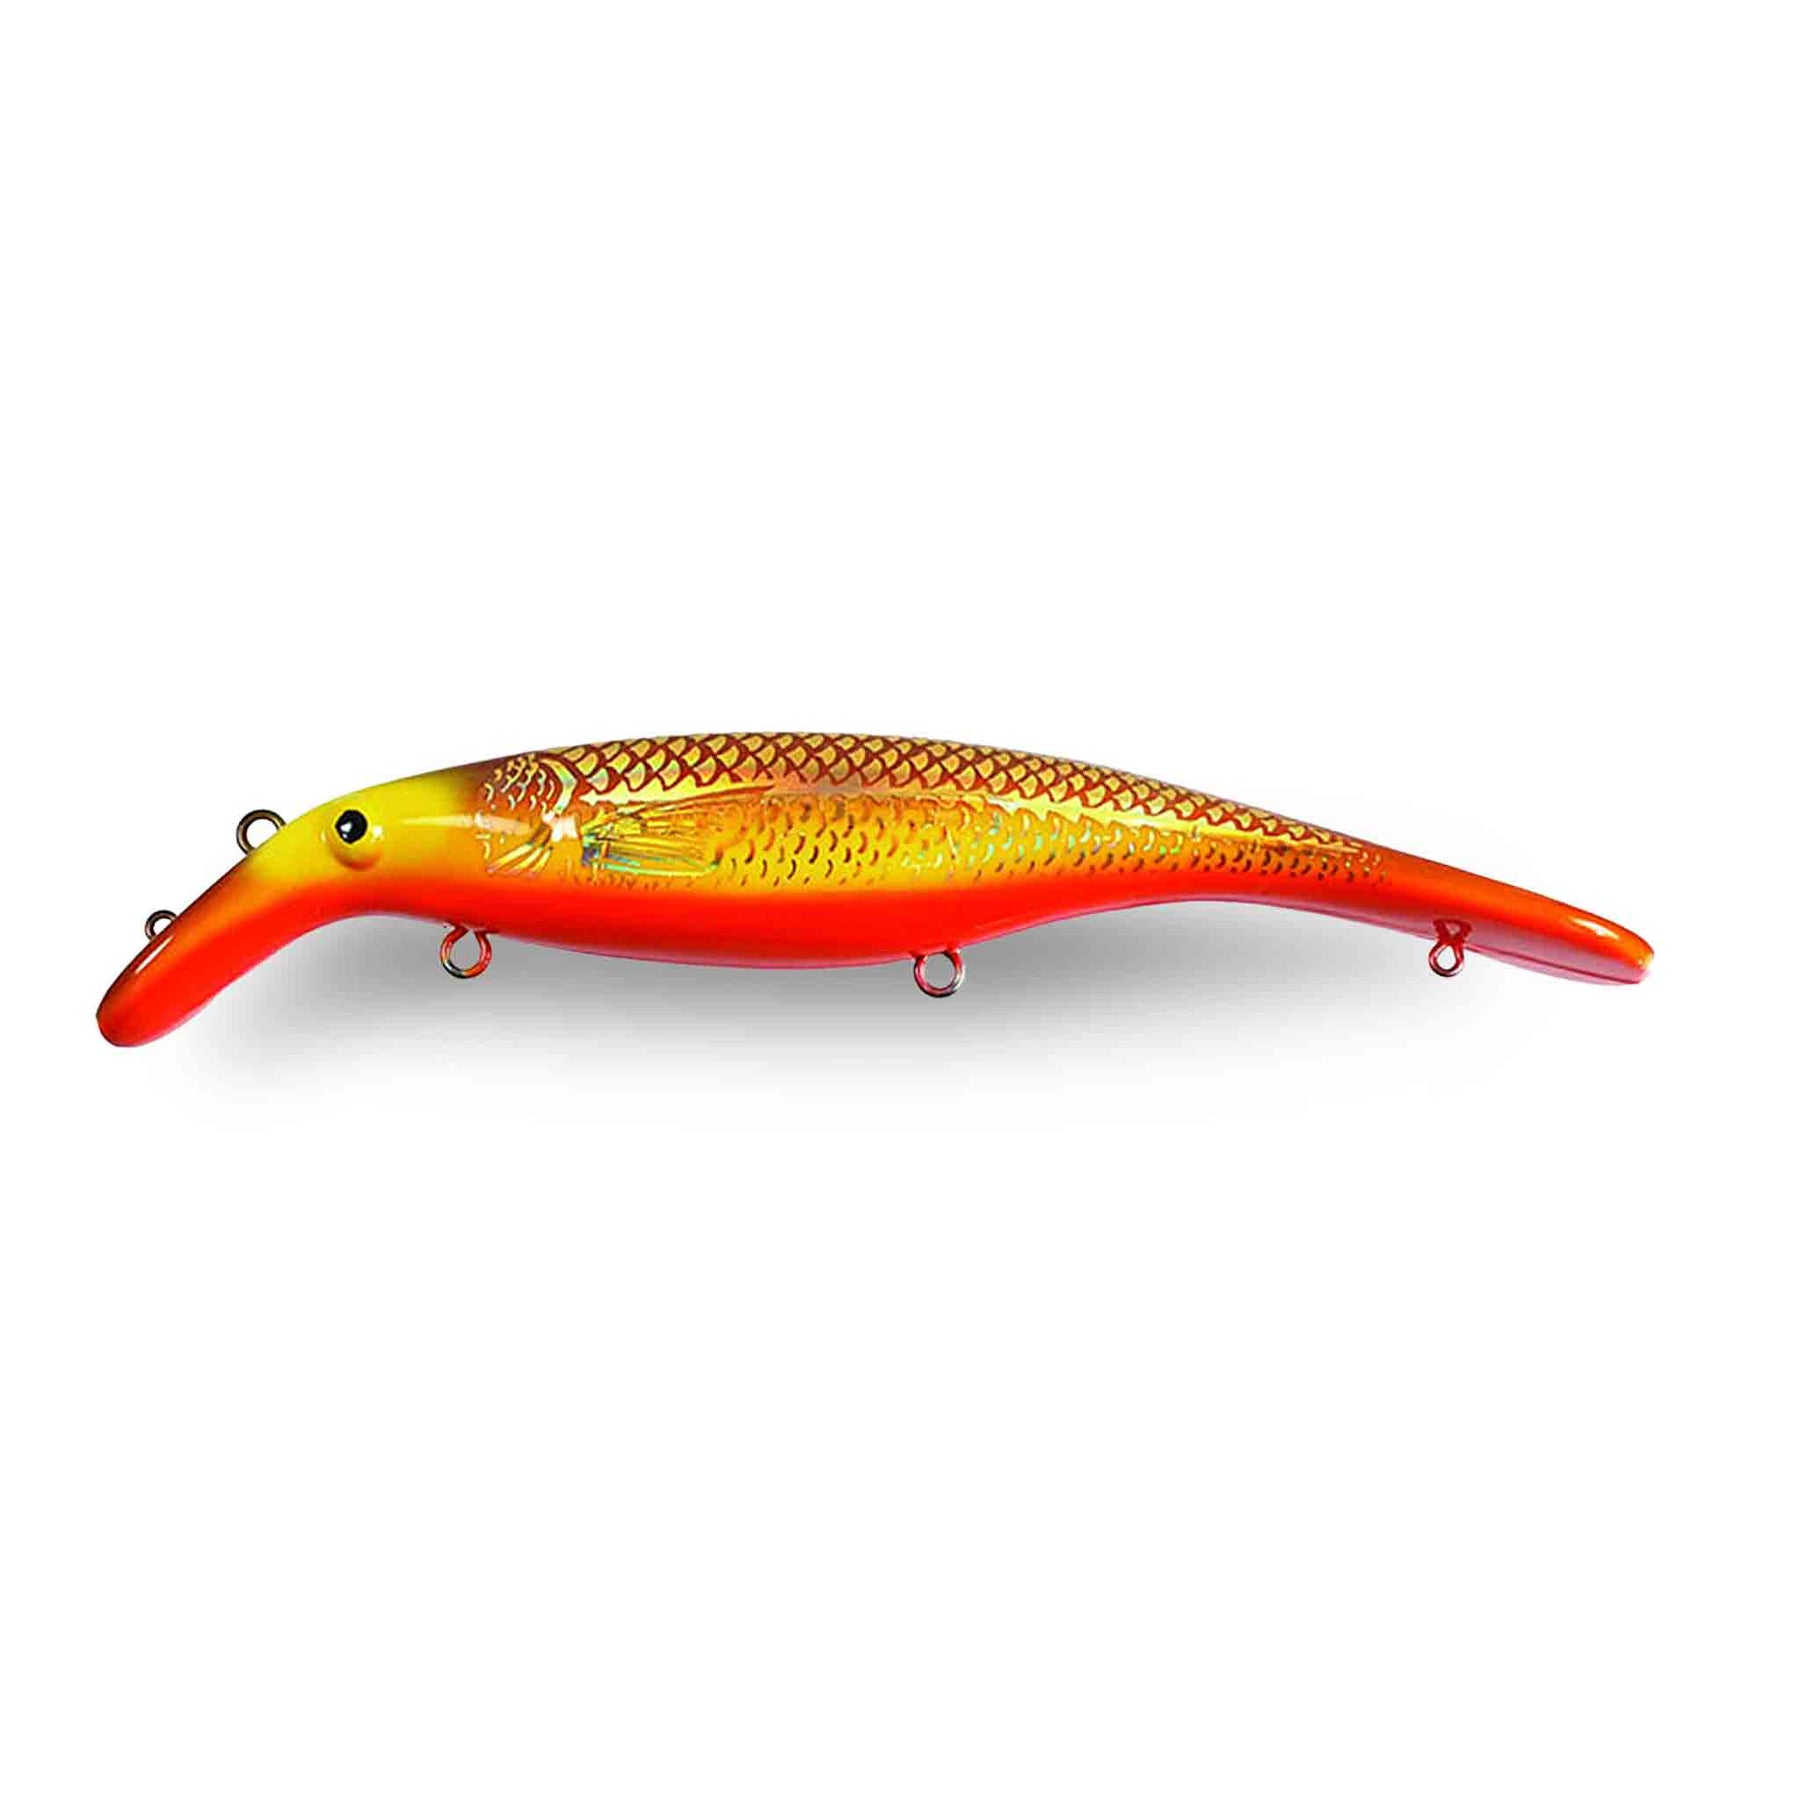 View of Crankbaits Drifter Tackle Believer Straight 8" Crankbait Hot Holo Walleye available at EZOKO Pike and Musky Shop